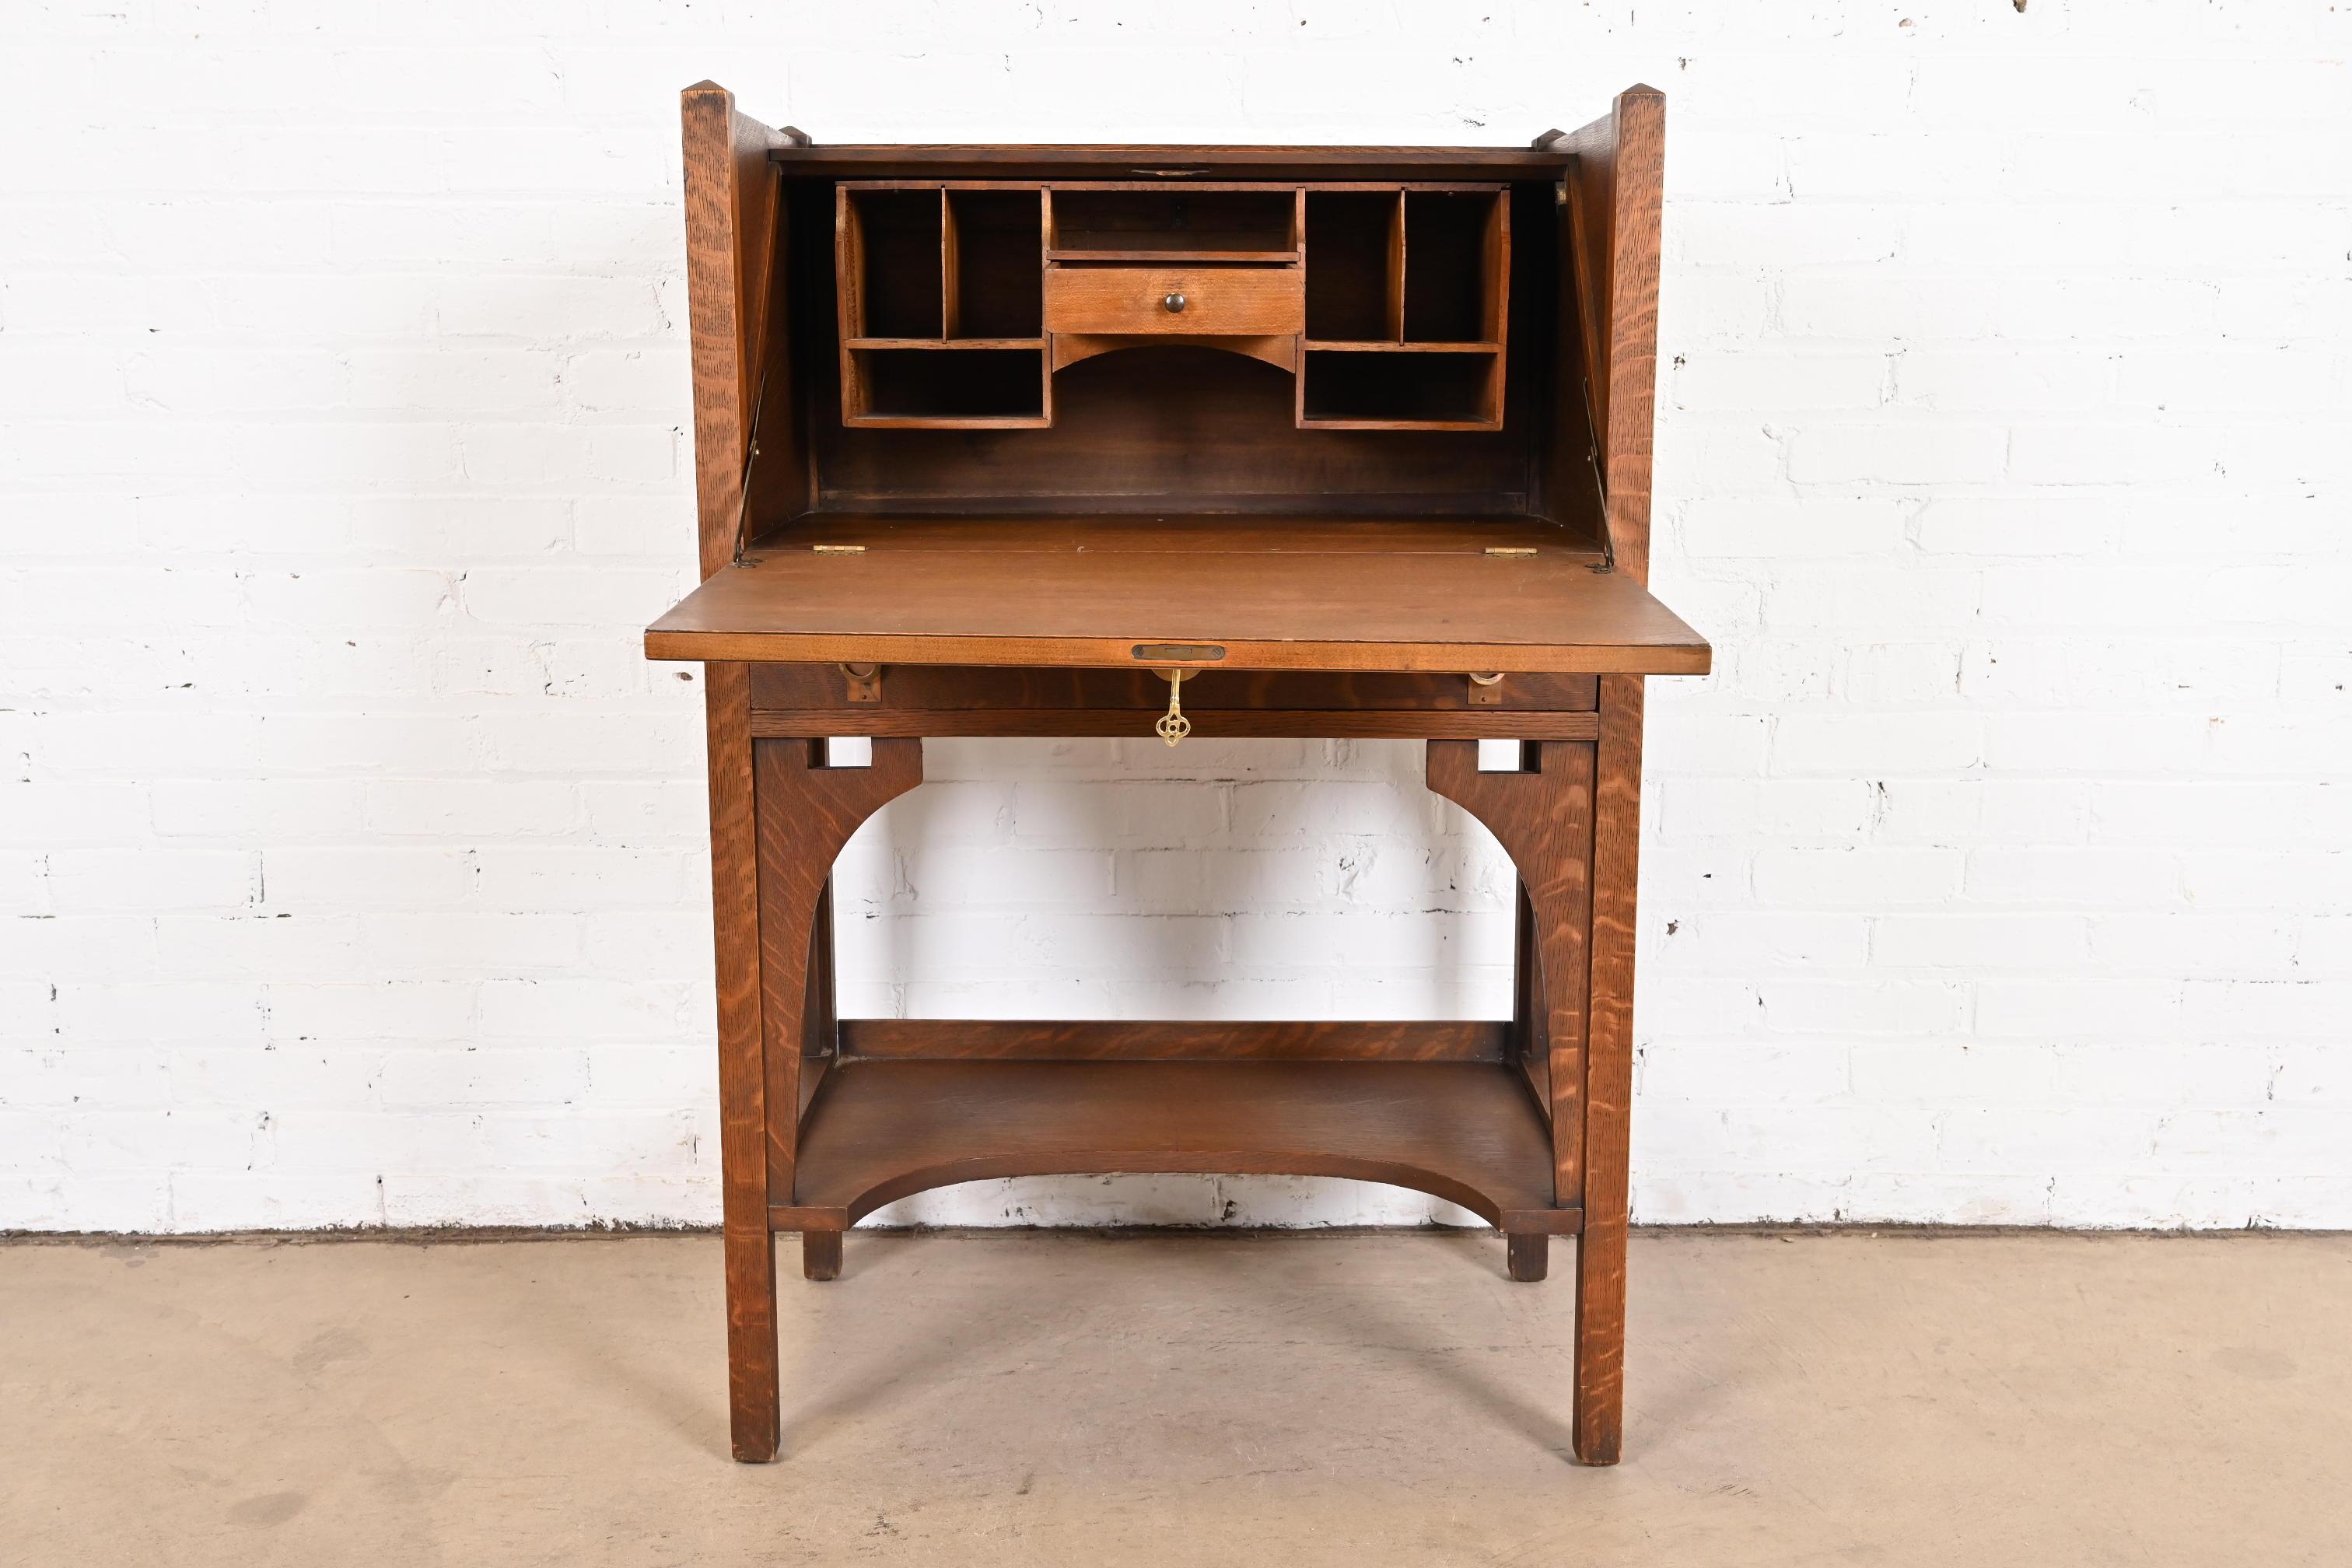 20th Century Antique Mission Oak Arts & Crafts Secretary Desk Attributed to Stickley Brothers